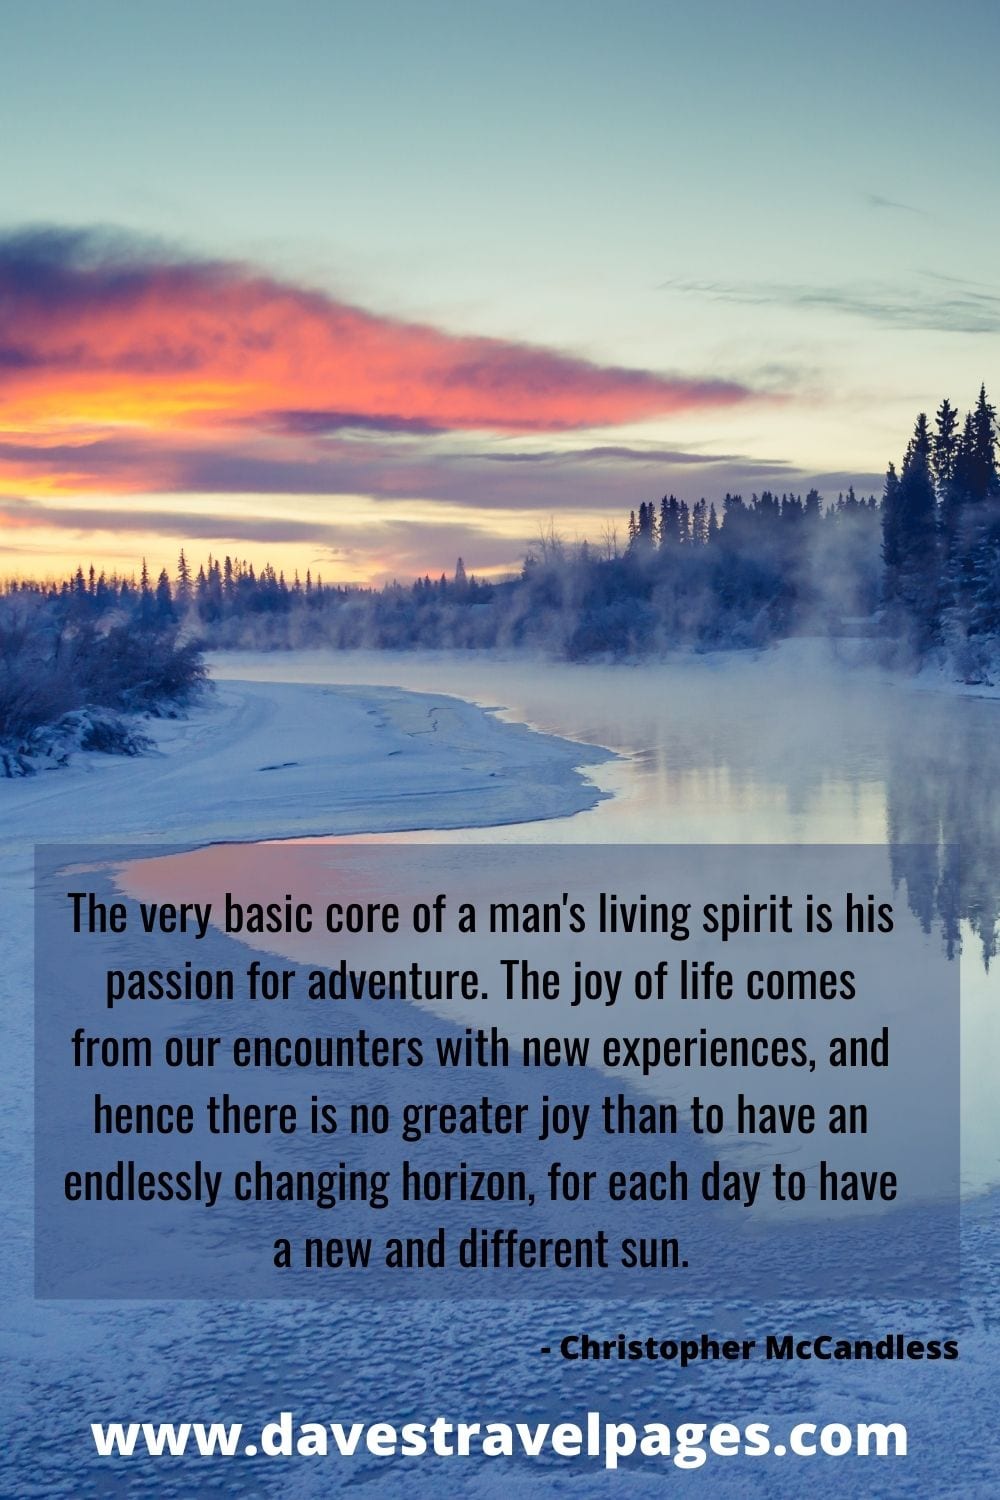 The very basic core of a man's living spirit is his passion for adventure. The joy of life comes from our encounters with new experiences, and hence there is no greater joy than to have an endlessly changing horizon, for each day to have a new and different sun. - Christopher McCandless